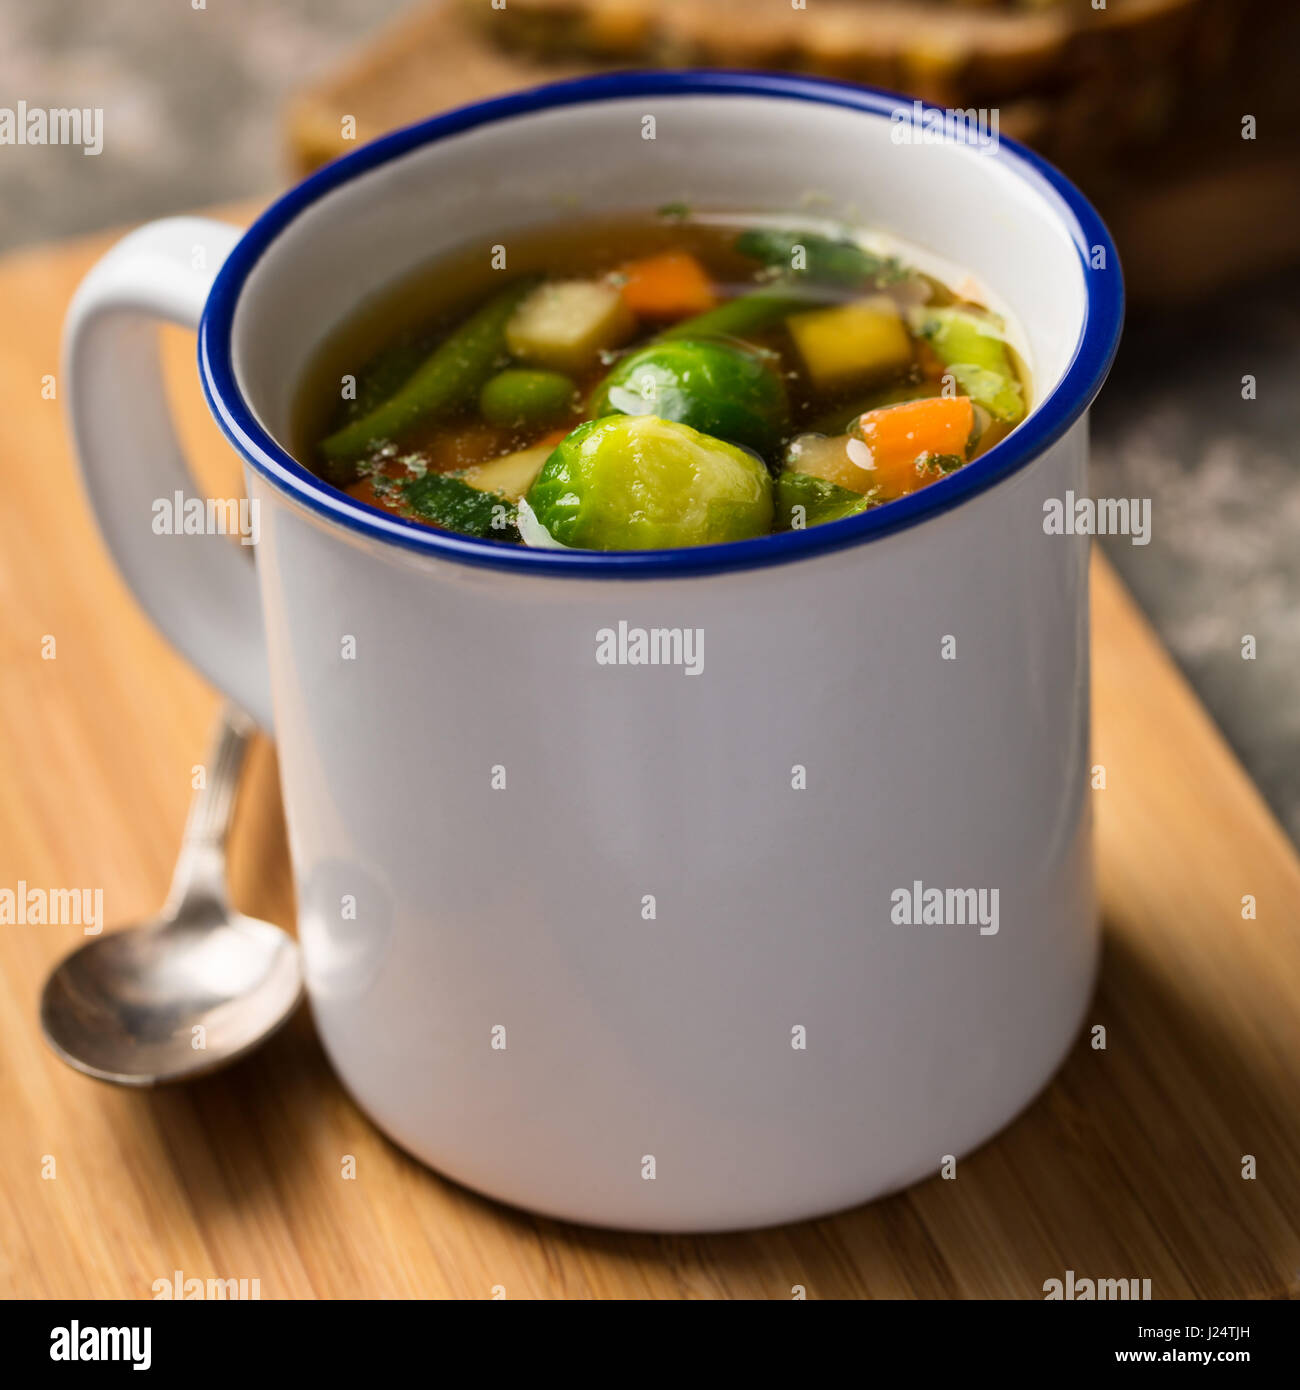 Vegan vegetable soup with brussels sprouts, carrots, peas and beans. Stock Photo